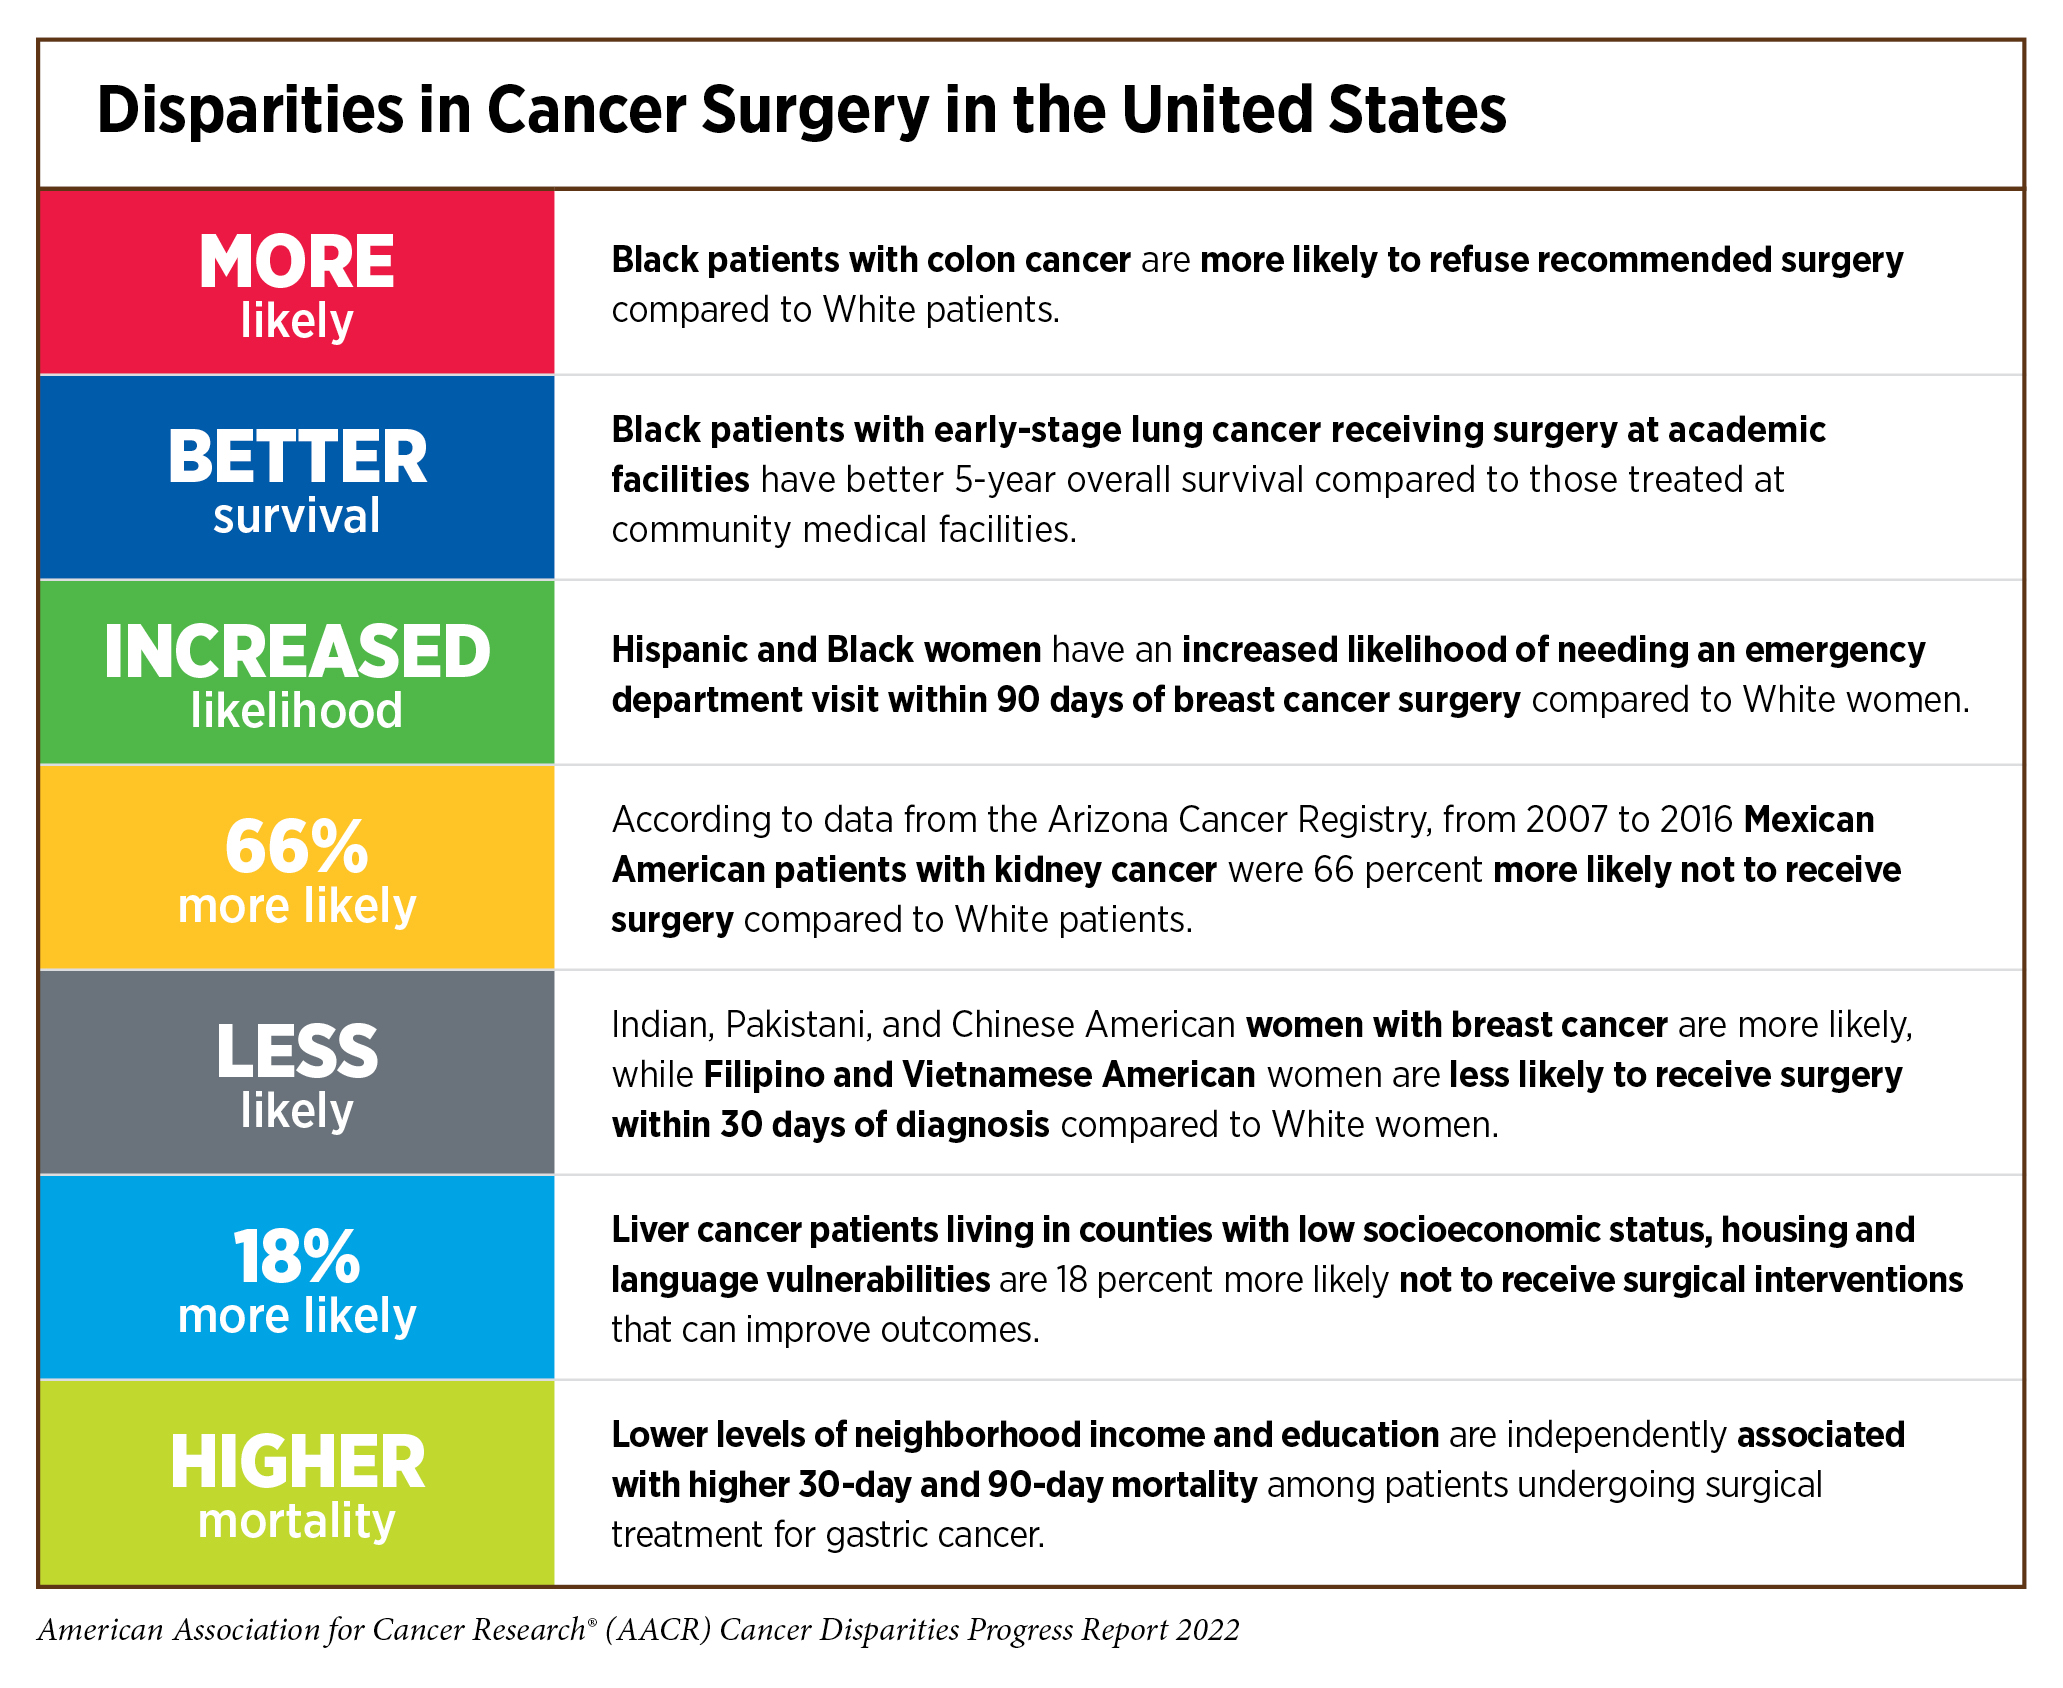 Disparities in Clinical Research and Cancer Treatment